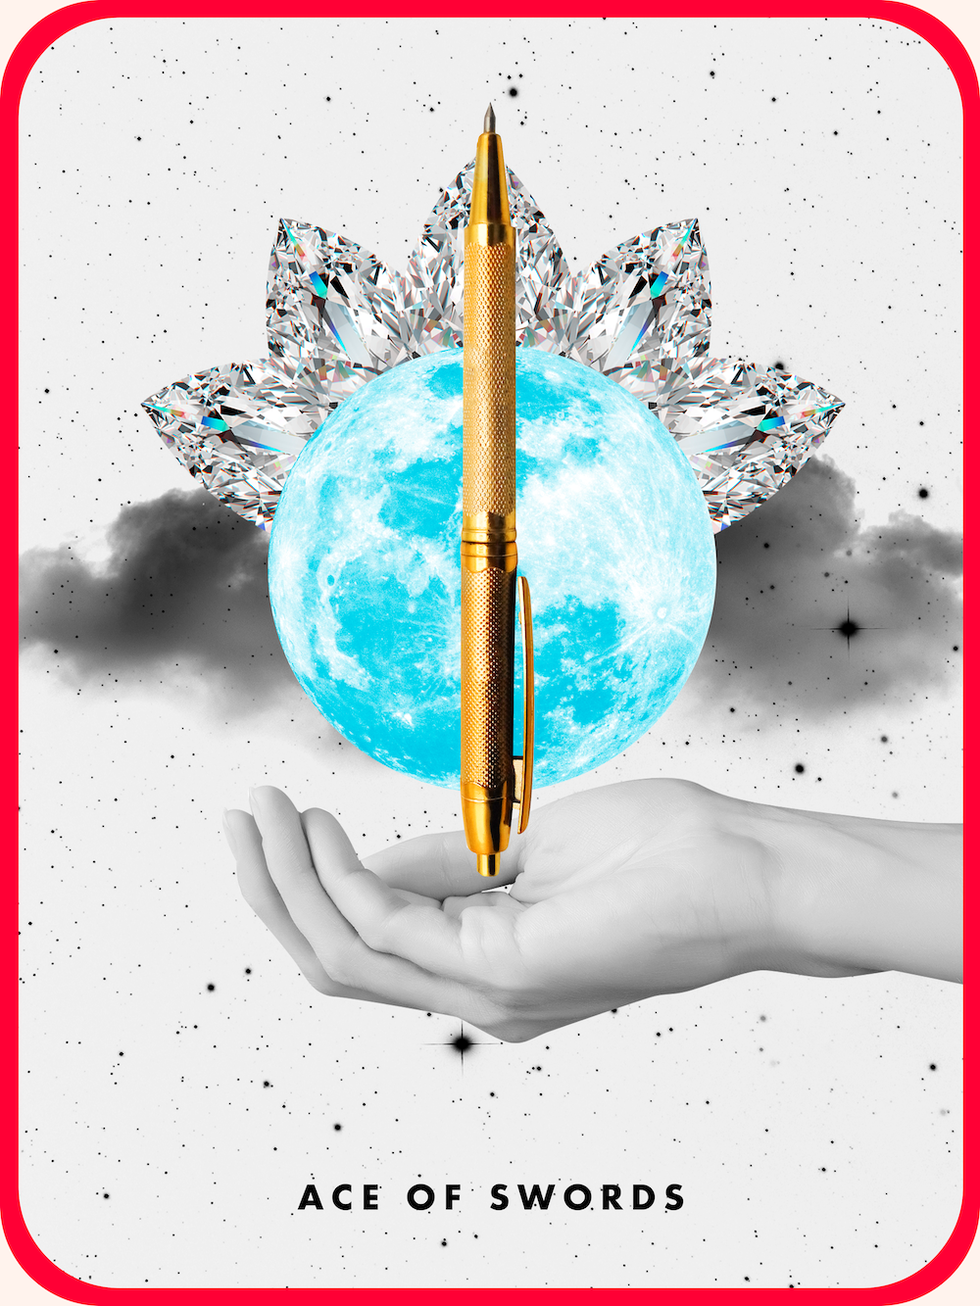 the tarot card the ace of swords, showing a hand holding up a golden pen